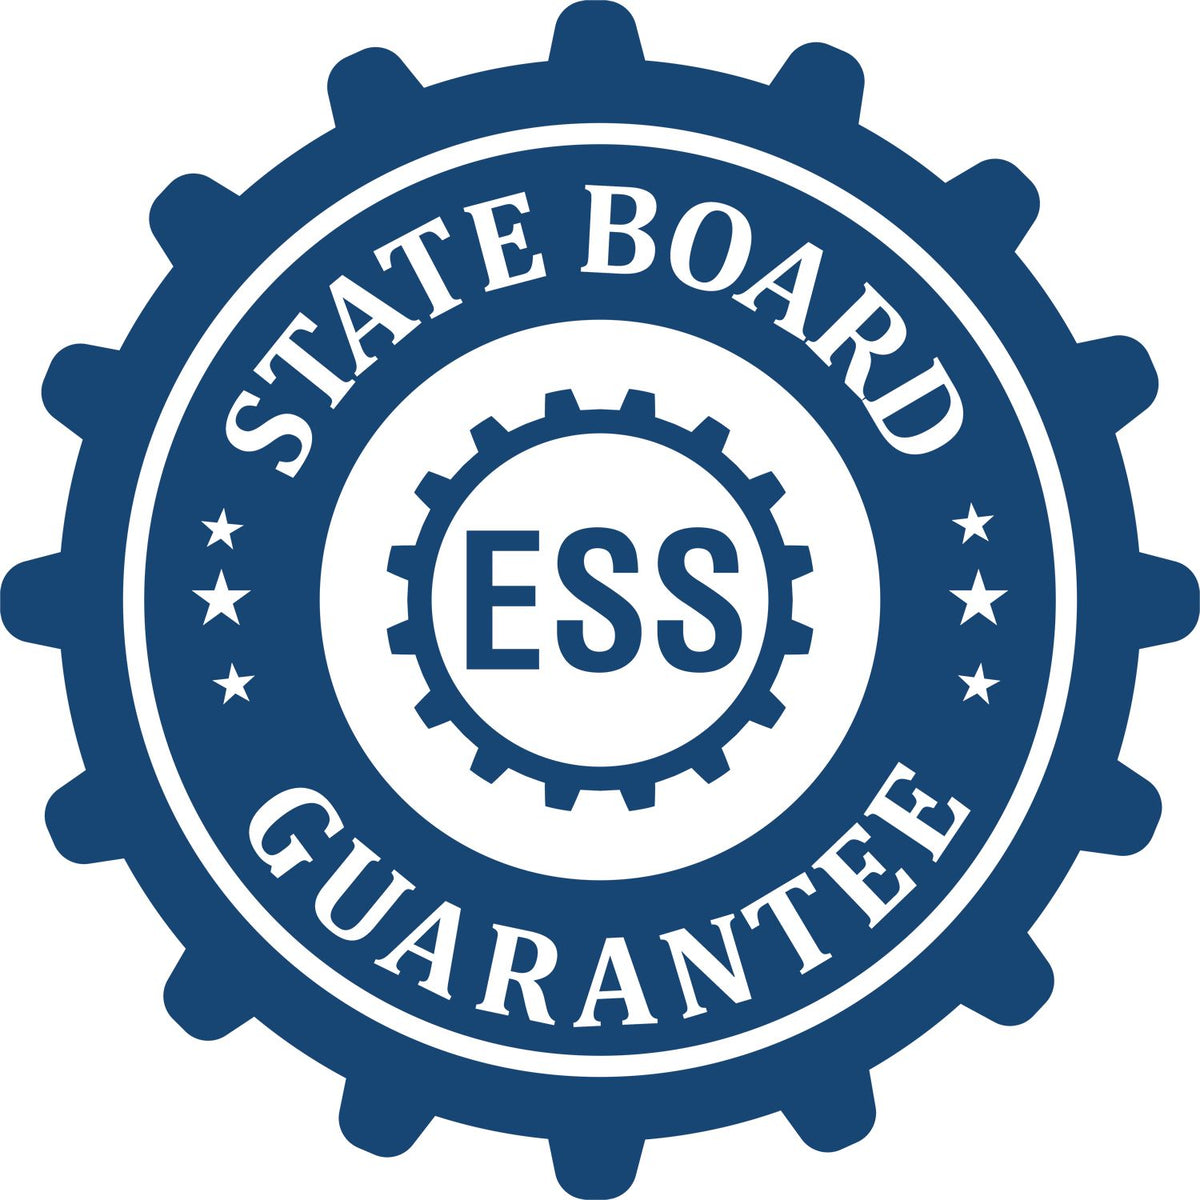 An emblem in a gear shape illustrating a state board guarantee for the Texas Professional Engineer Seal Stamp product.